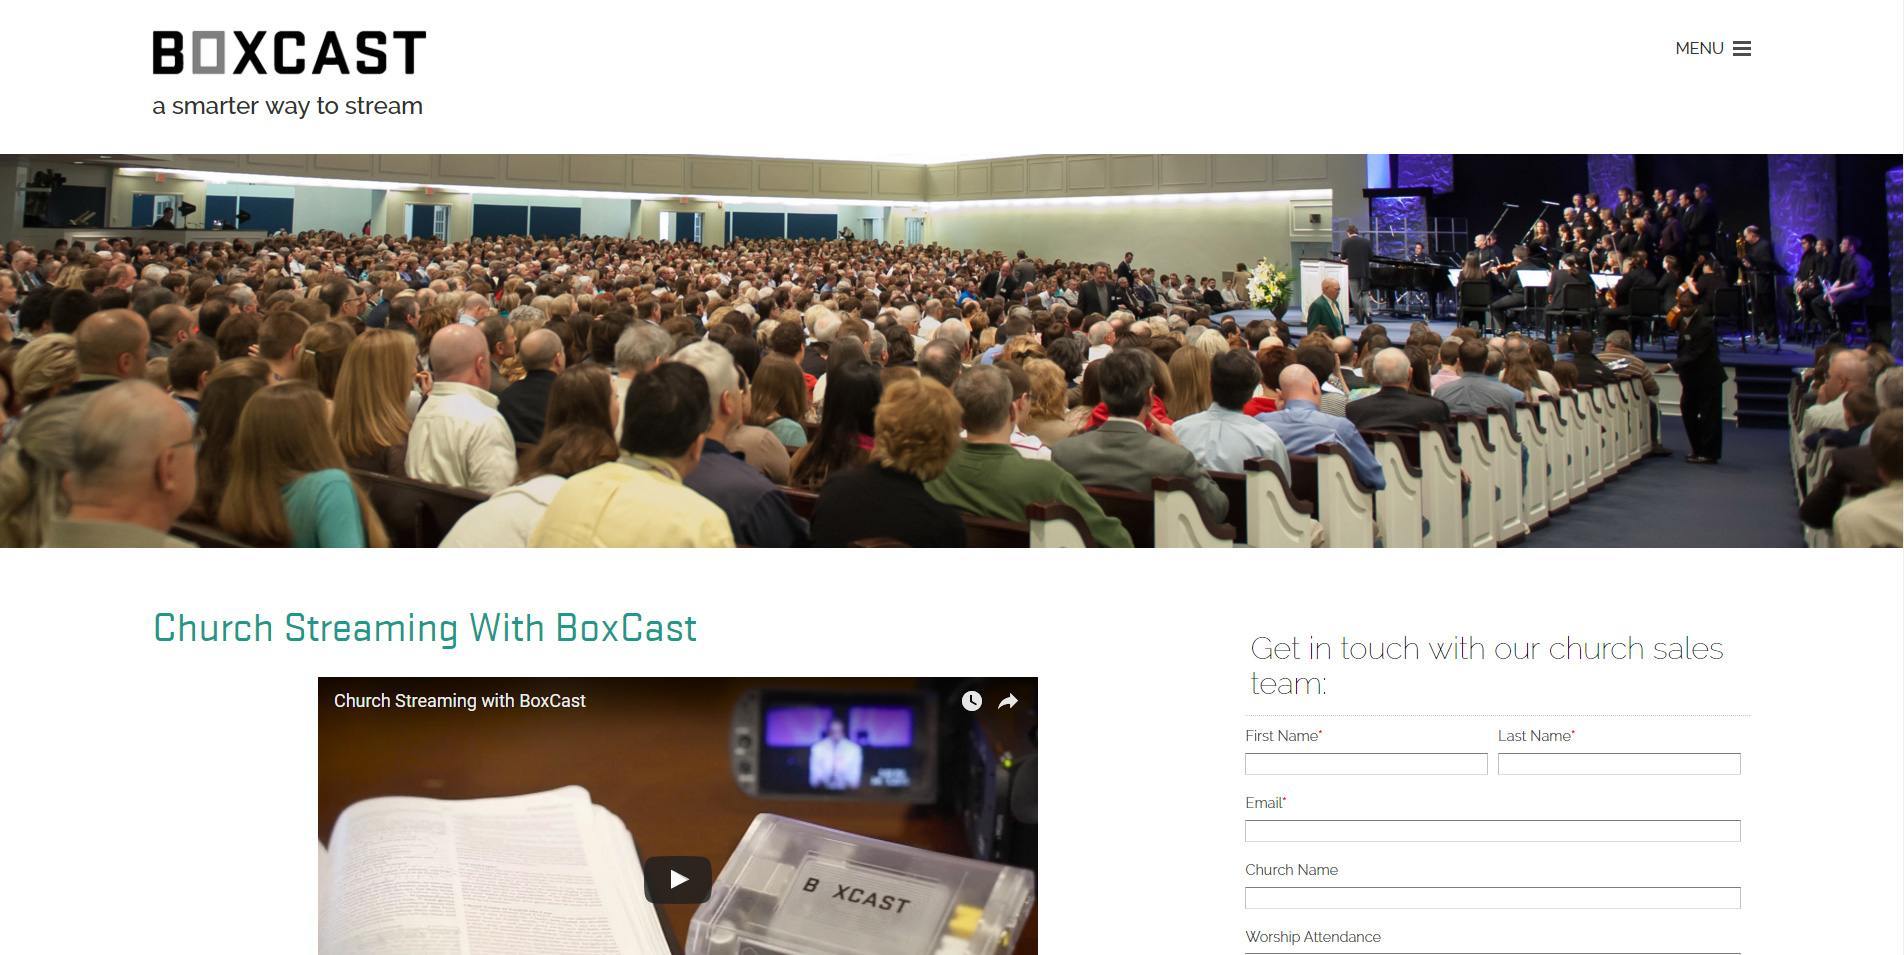 Boxcast Live Streaming Service for Church